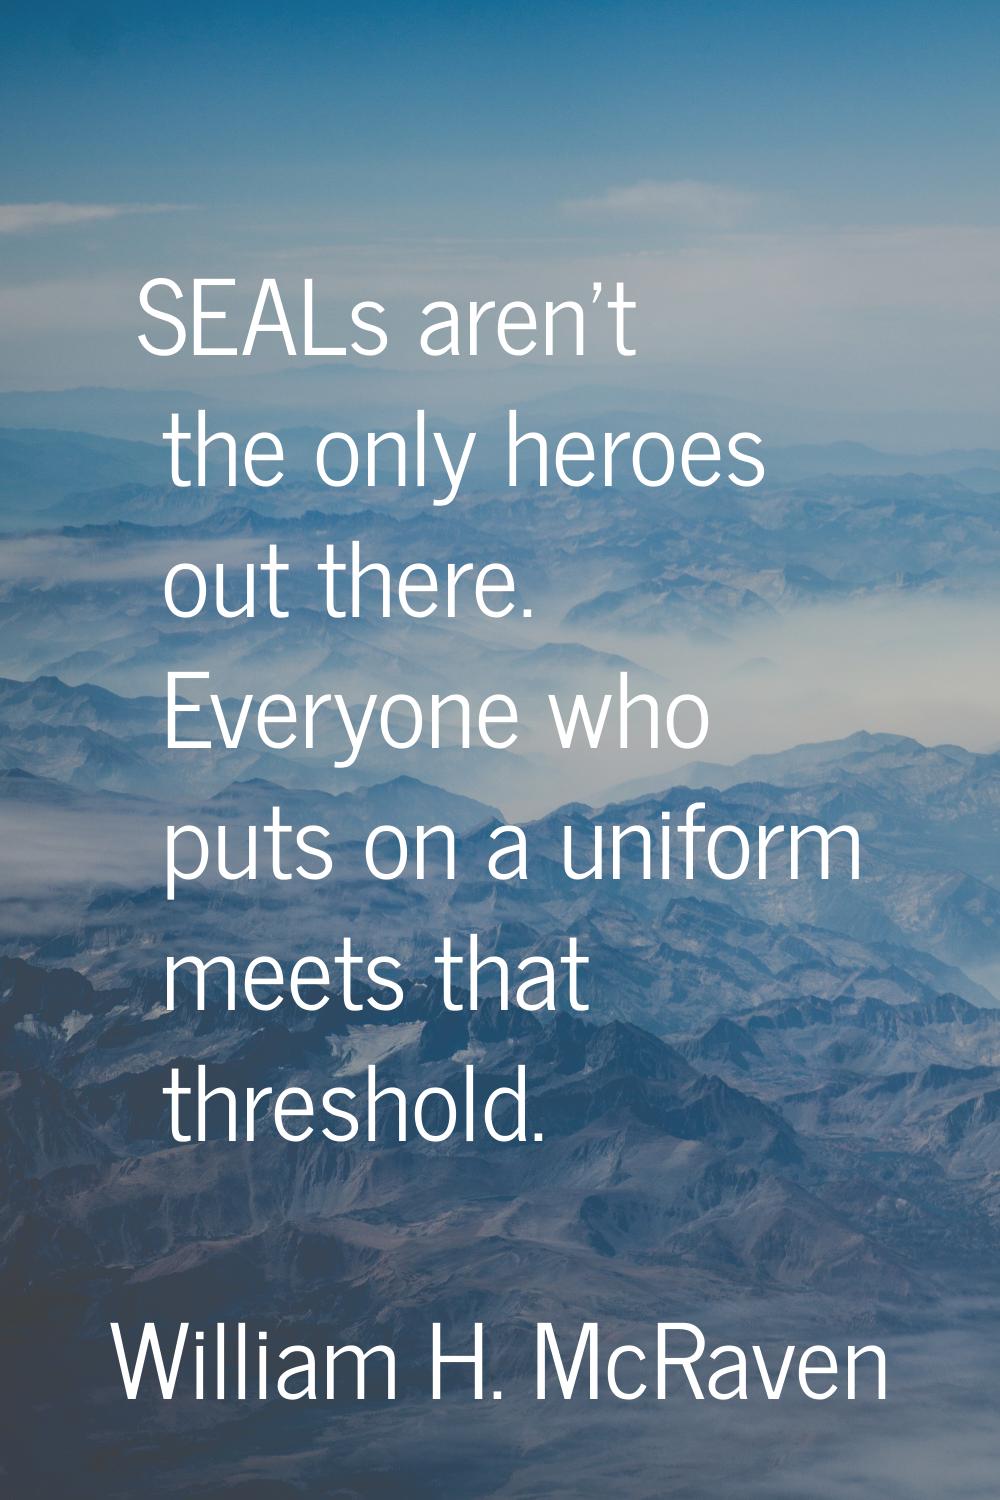 SEALs aren't the only heroes out there. Everyone who puts on a uniform meets that threshold.